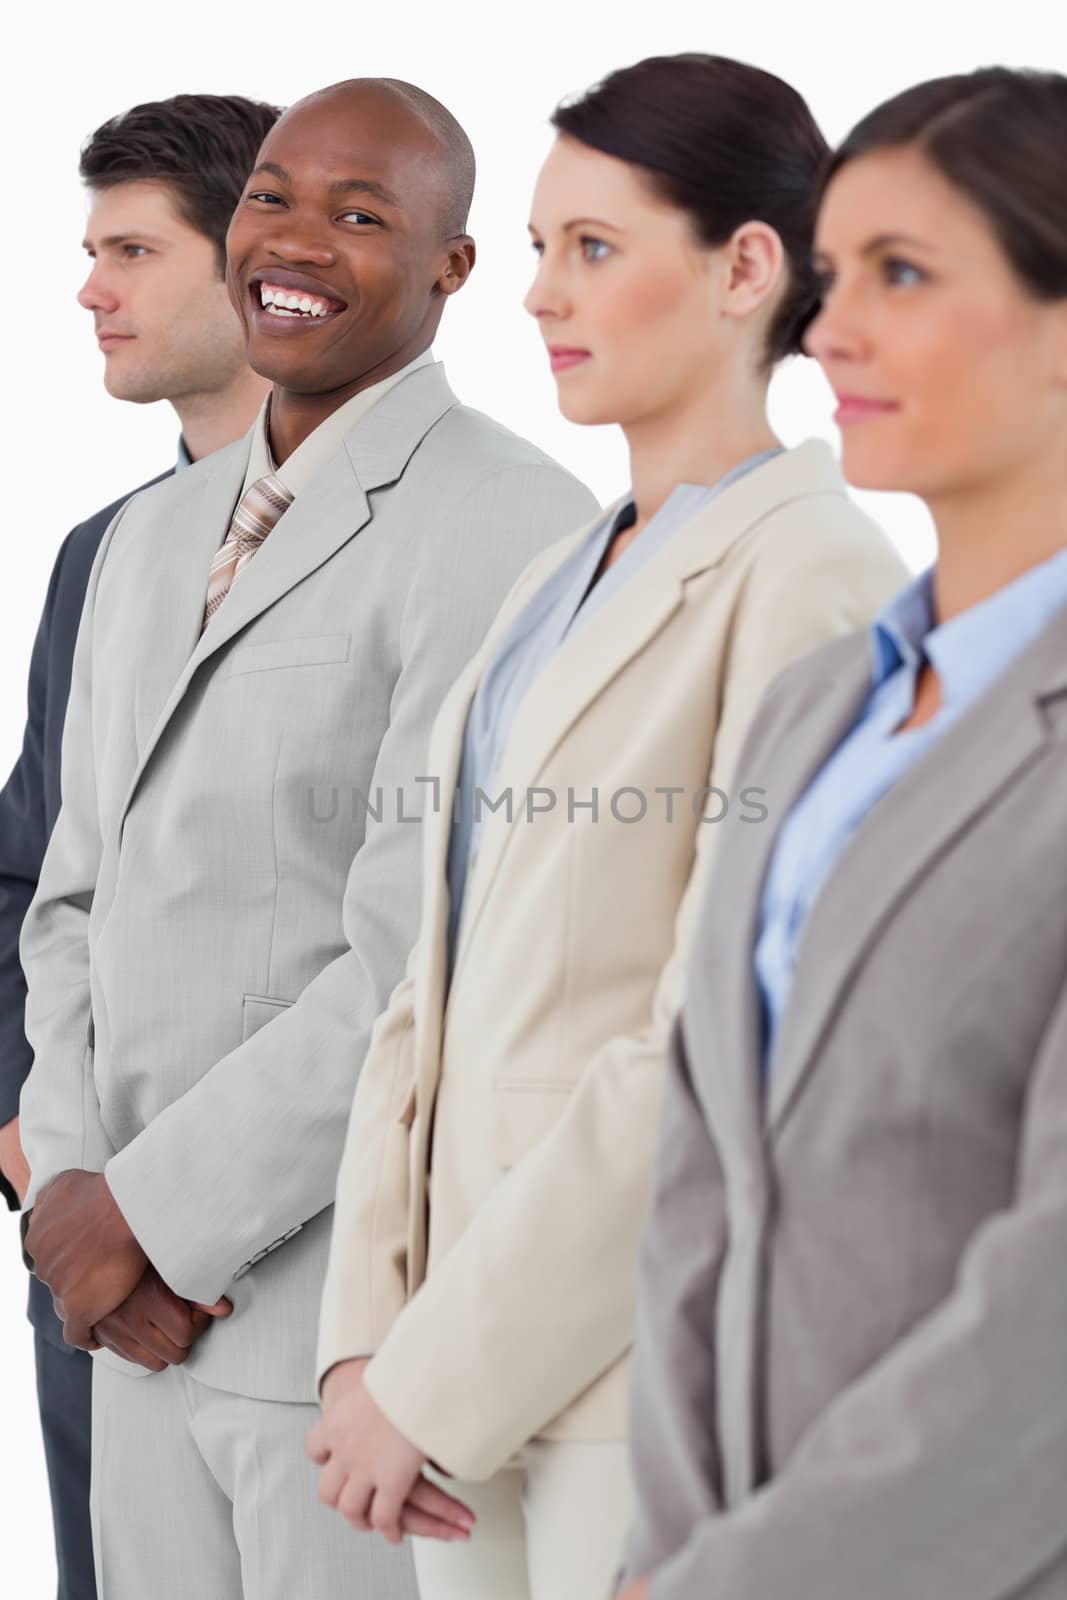 Smiling businessman standing between his associates against a white background